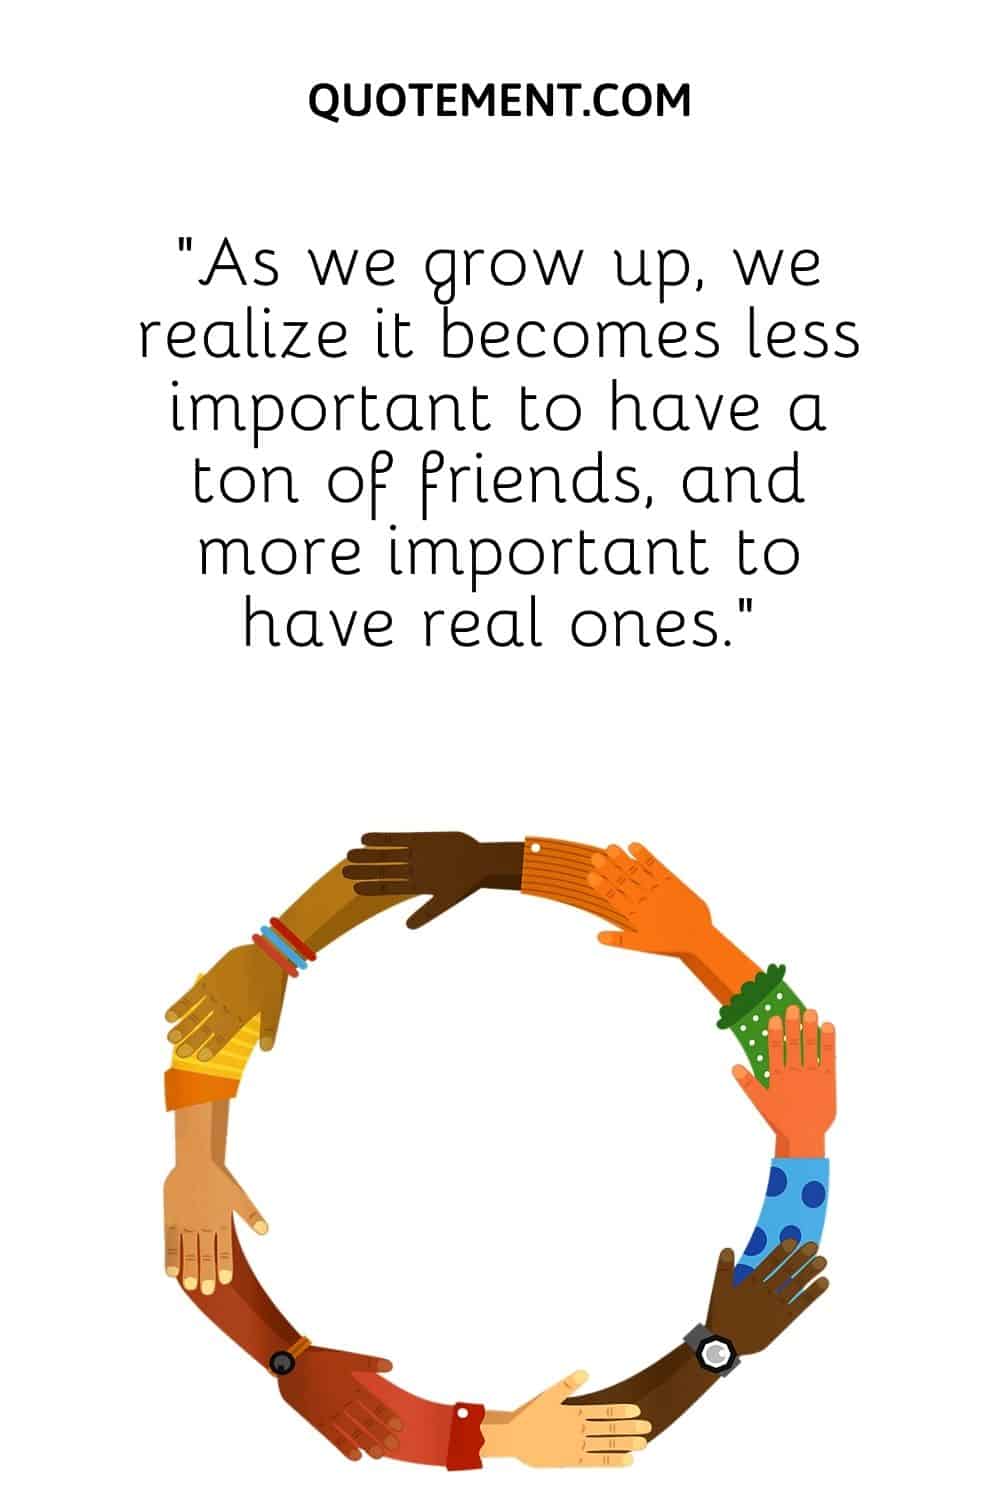 “As we grow up, we realize it becomes less important to have a ton of friends, and more important to have real ones.”